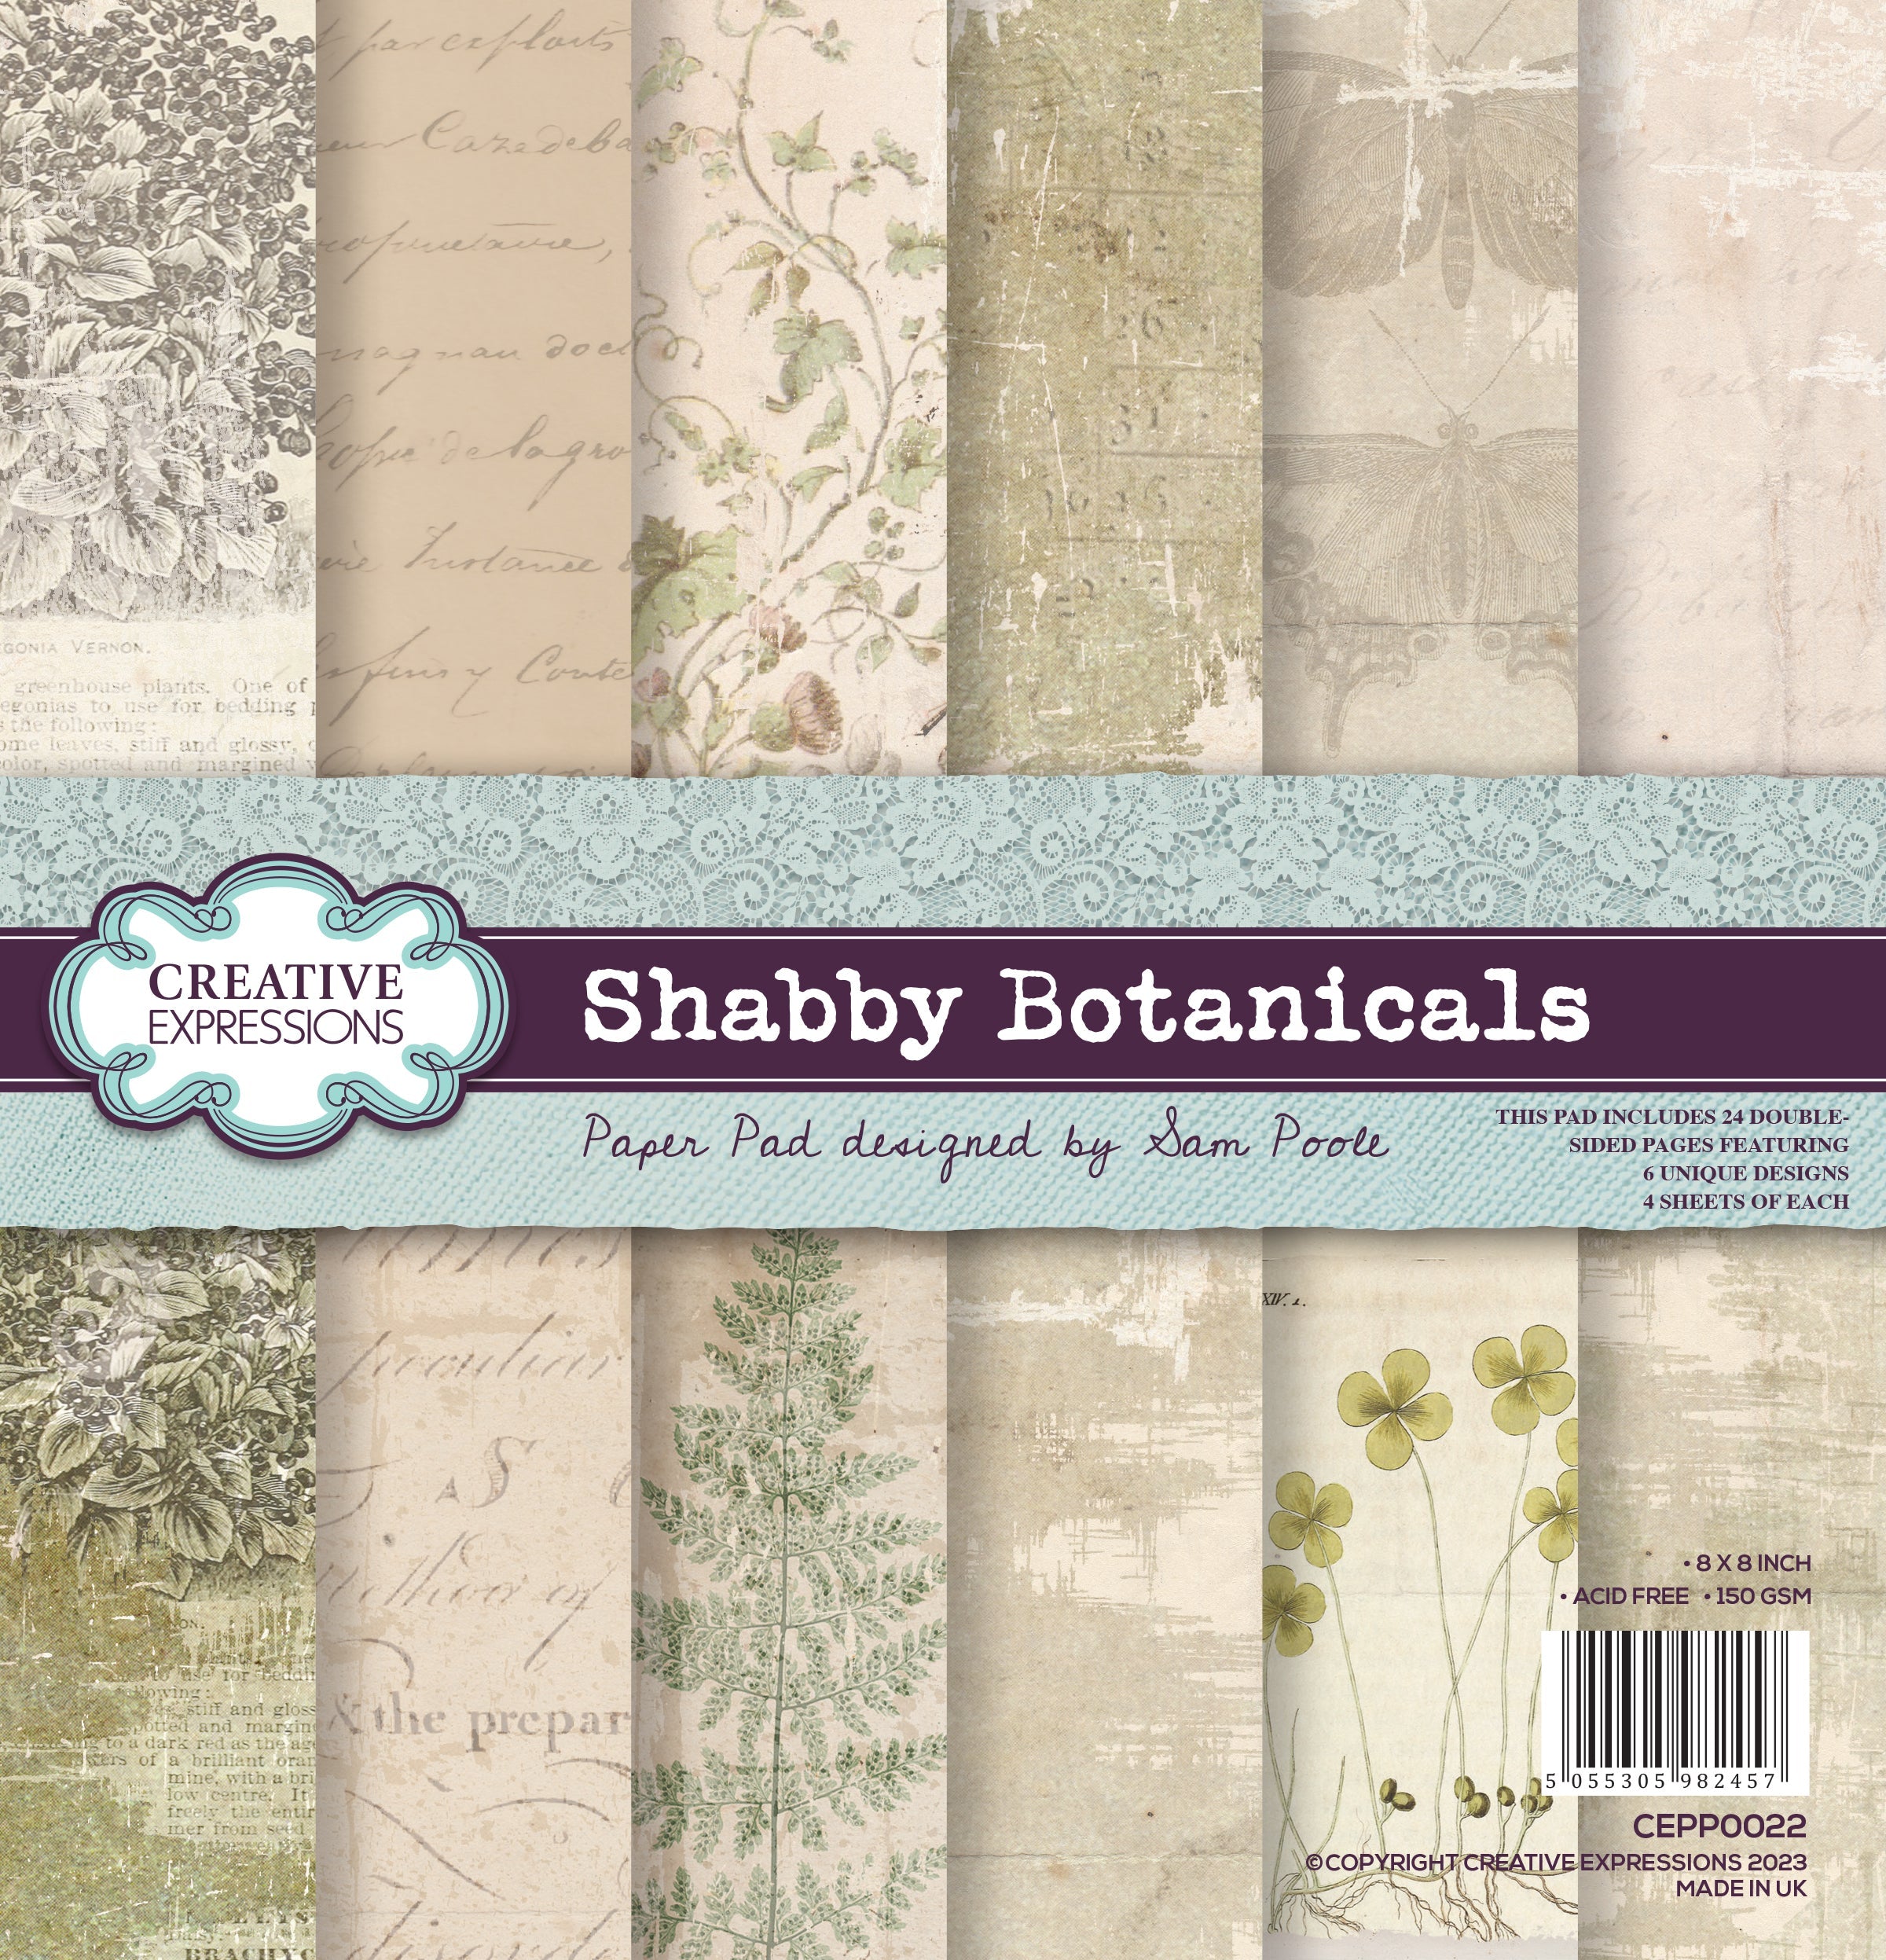 Creative Expressions Shabby Botanicals 8 in x 8 in Paper Pad